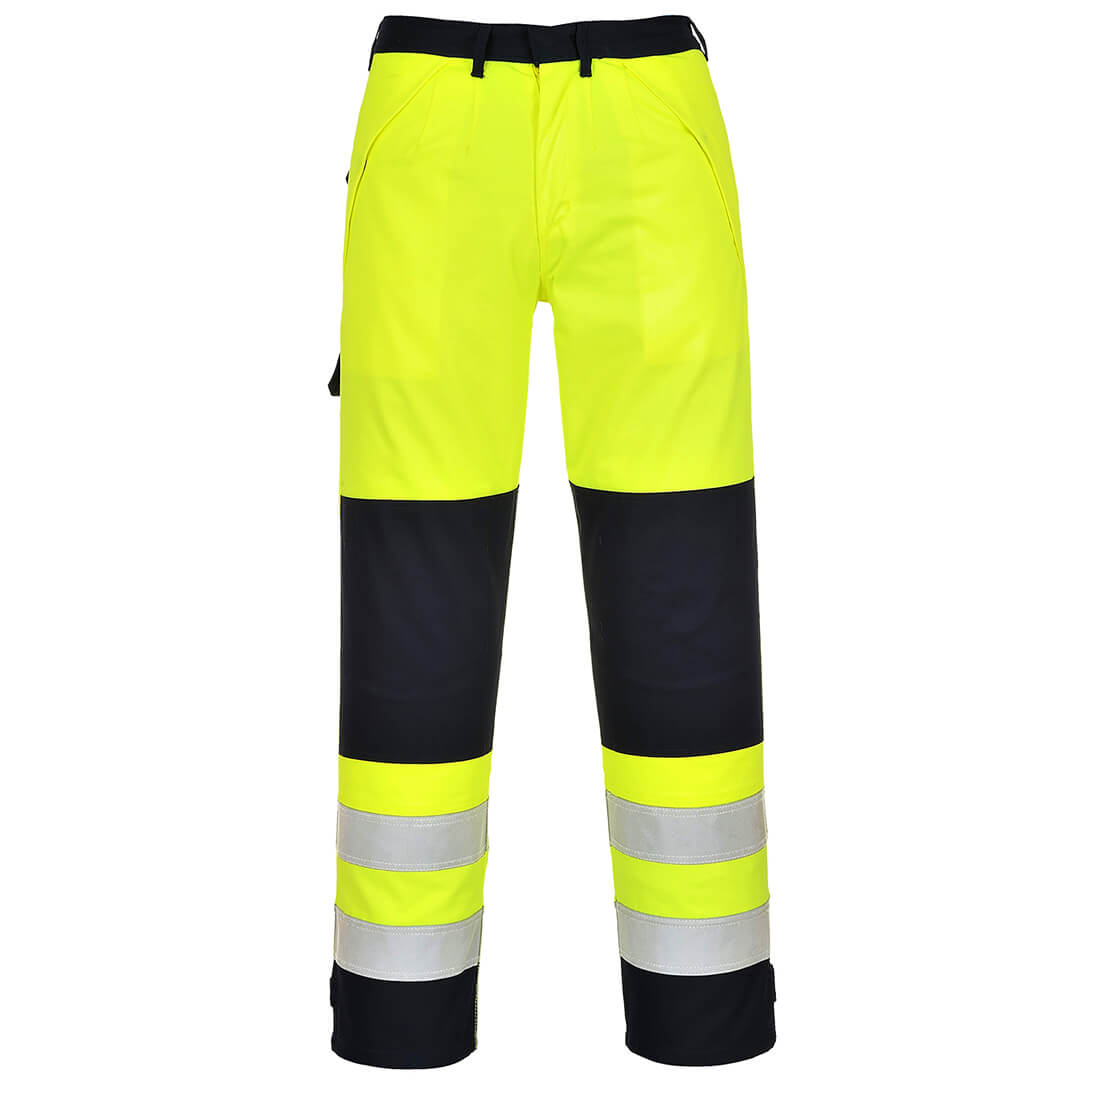 Image of Biz Flame Hi Vis Multi-Norm Flame Resistant Trousers Yellow / Navy XL